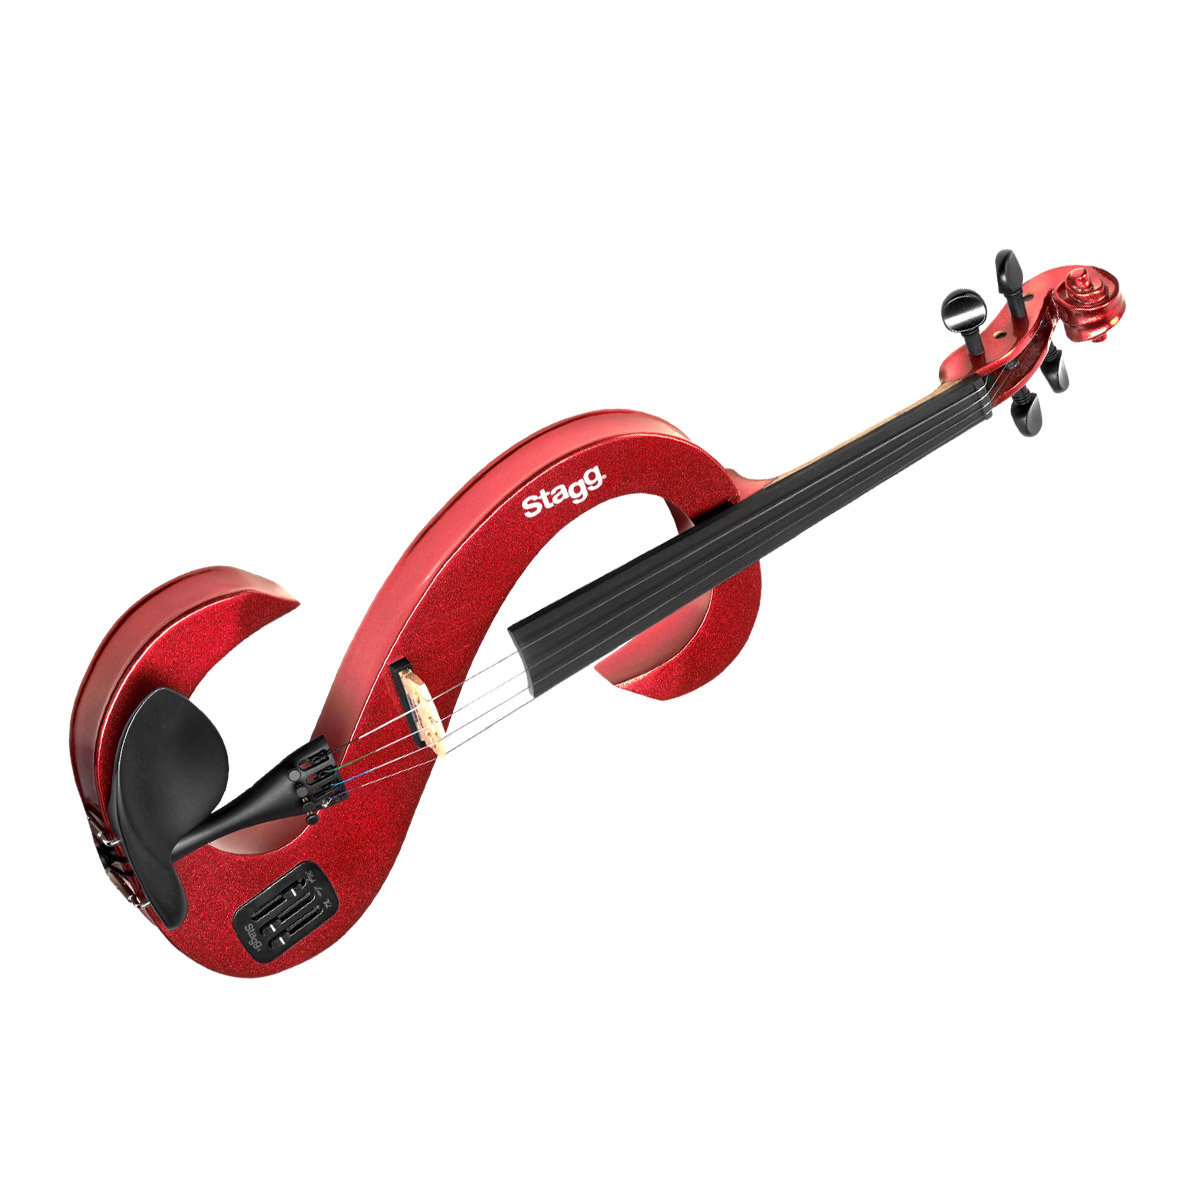 Stagg r500. Stagg SHOMOH. Stagg Set-Plus. Stagg Combo 20 AA R. Electric violin